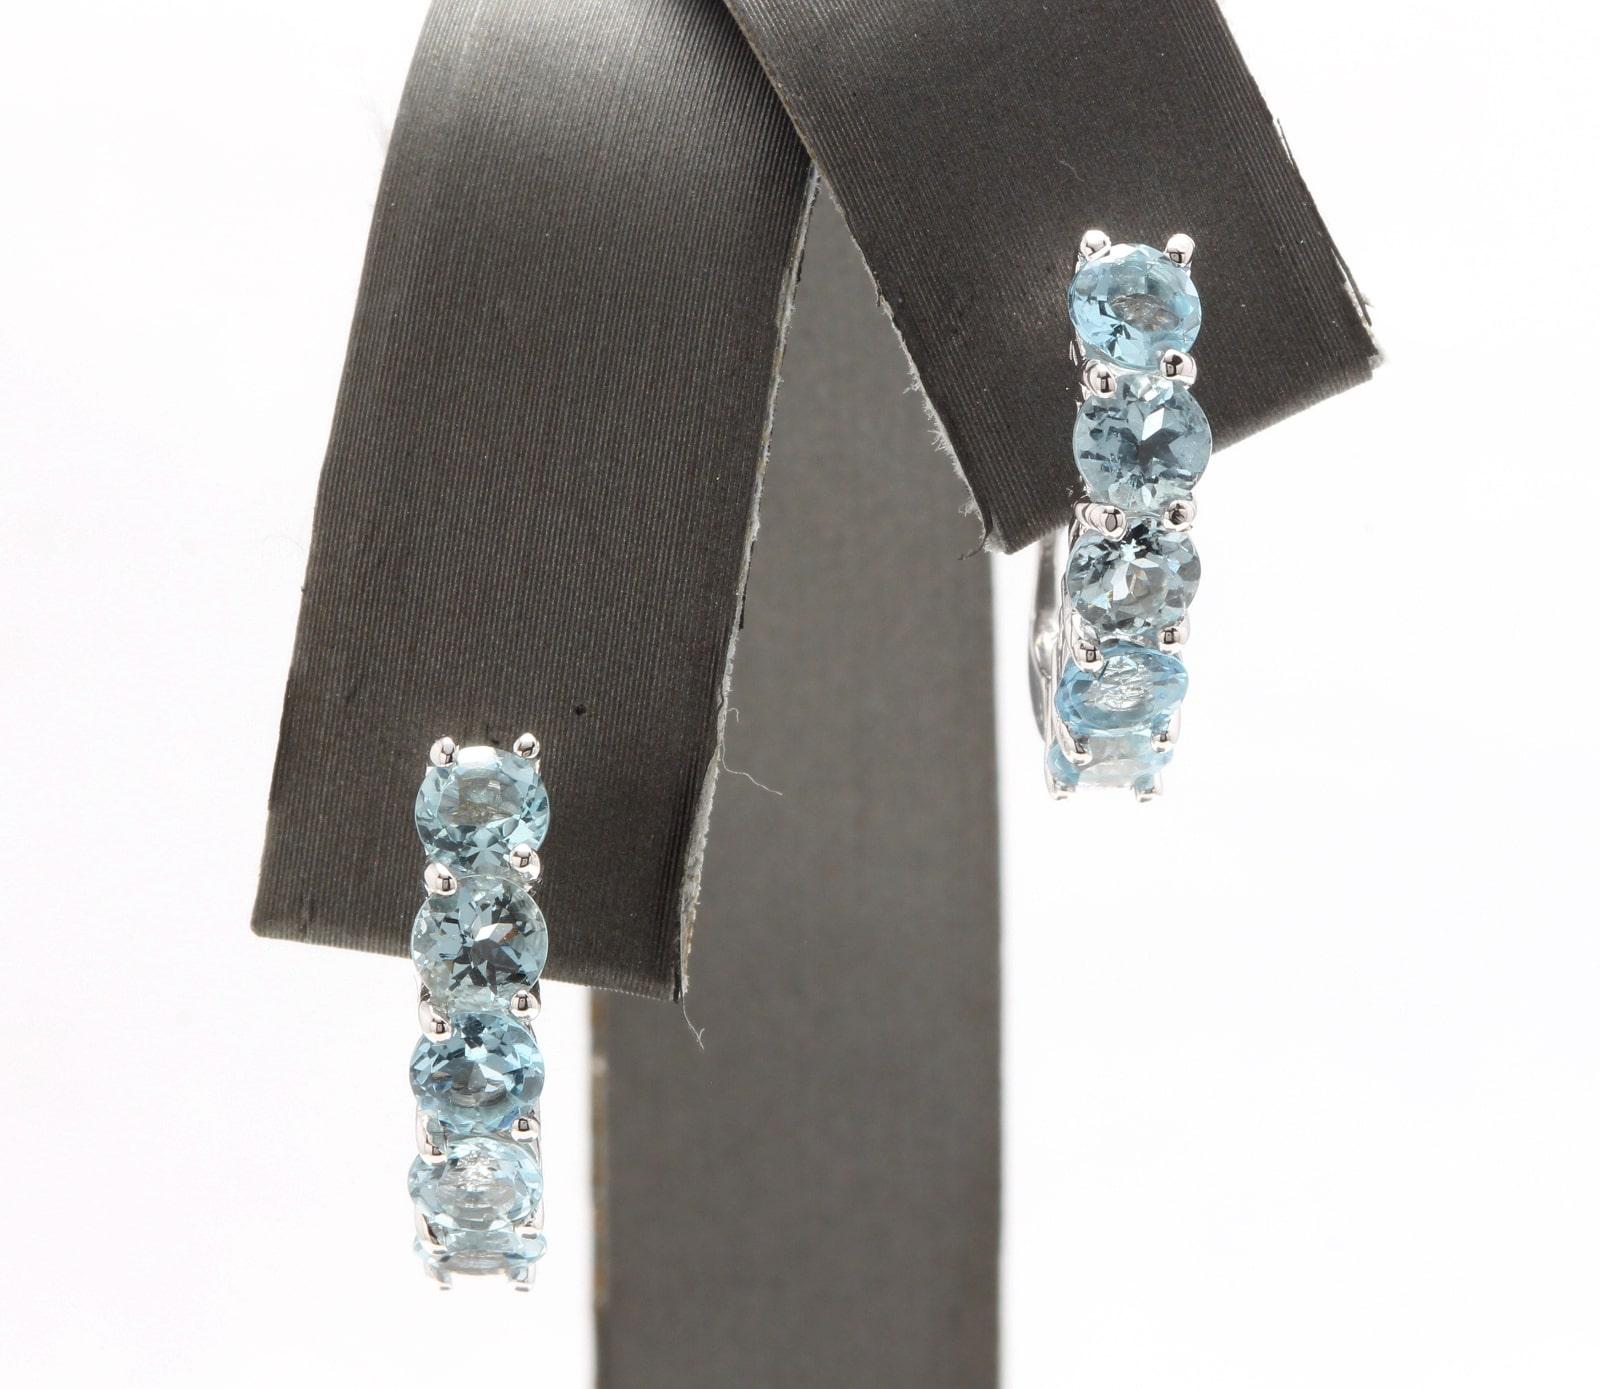 Exquisite 2.50 Carats Natural Aquamarine 14K Solid White Gold Huggie Earrings

Amazing looking piece! 

Total Natural Round Cut Blue Aquamarines Weight: 2.50 Carats (both earrings)

Aquamarine Measures: 4.2mm

Earring Measures: 17 x 16.3mm

Total